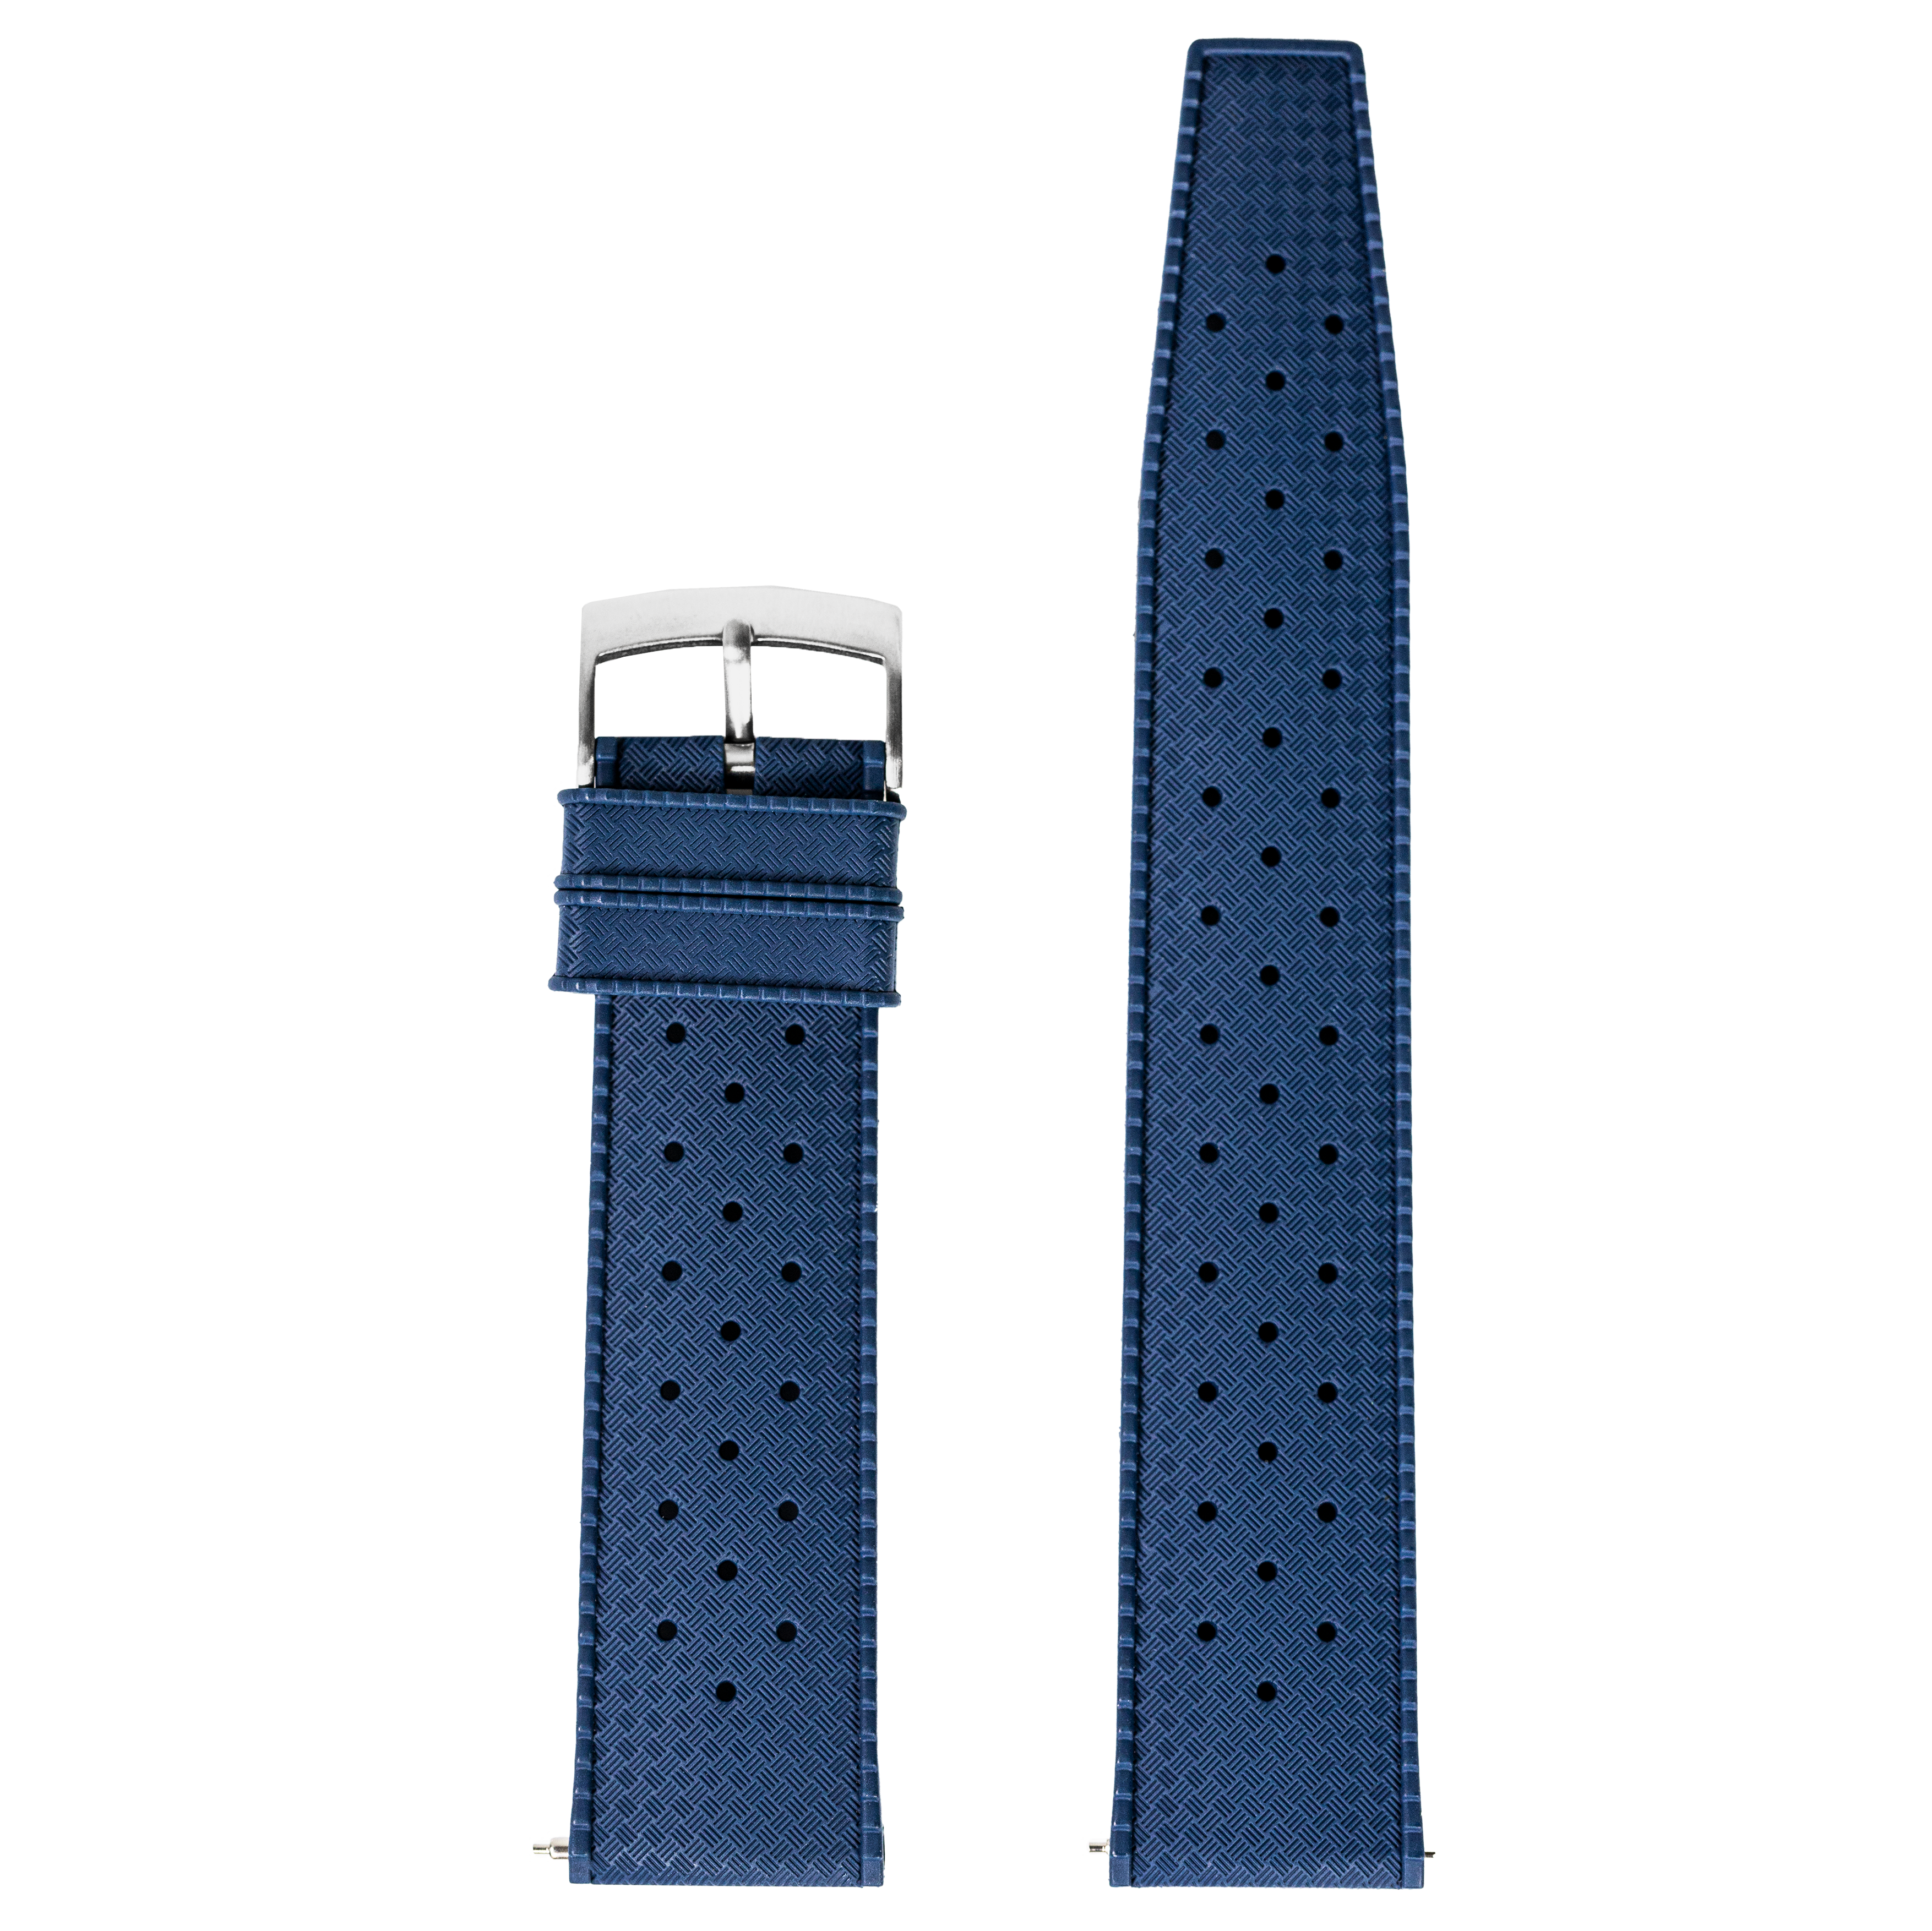 [QuickFit] King Tropic FKM Rubber - Navy Blue 20mm